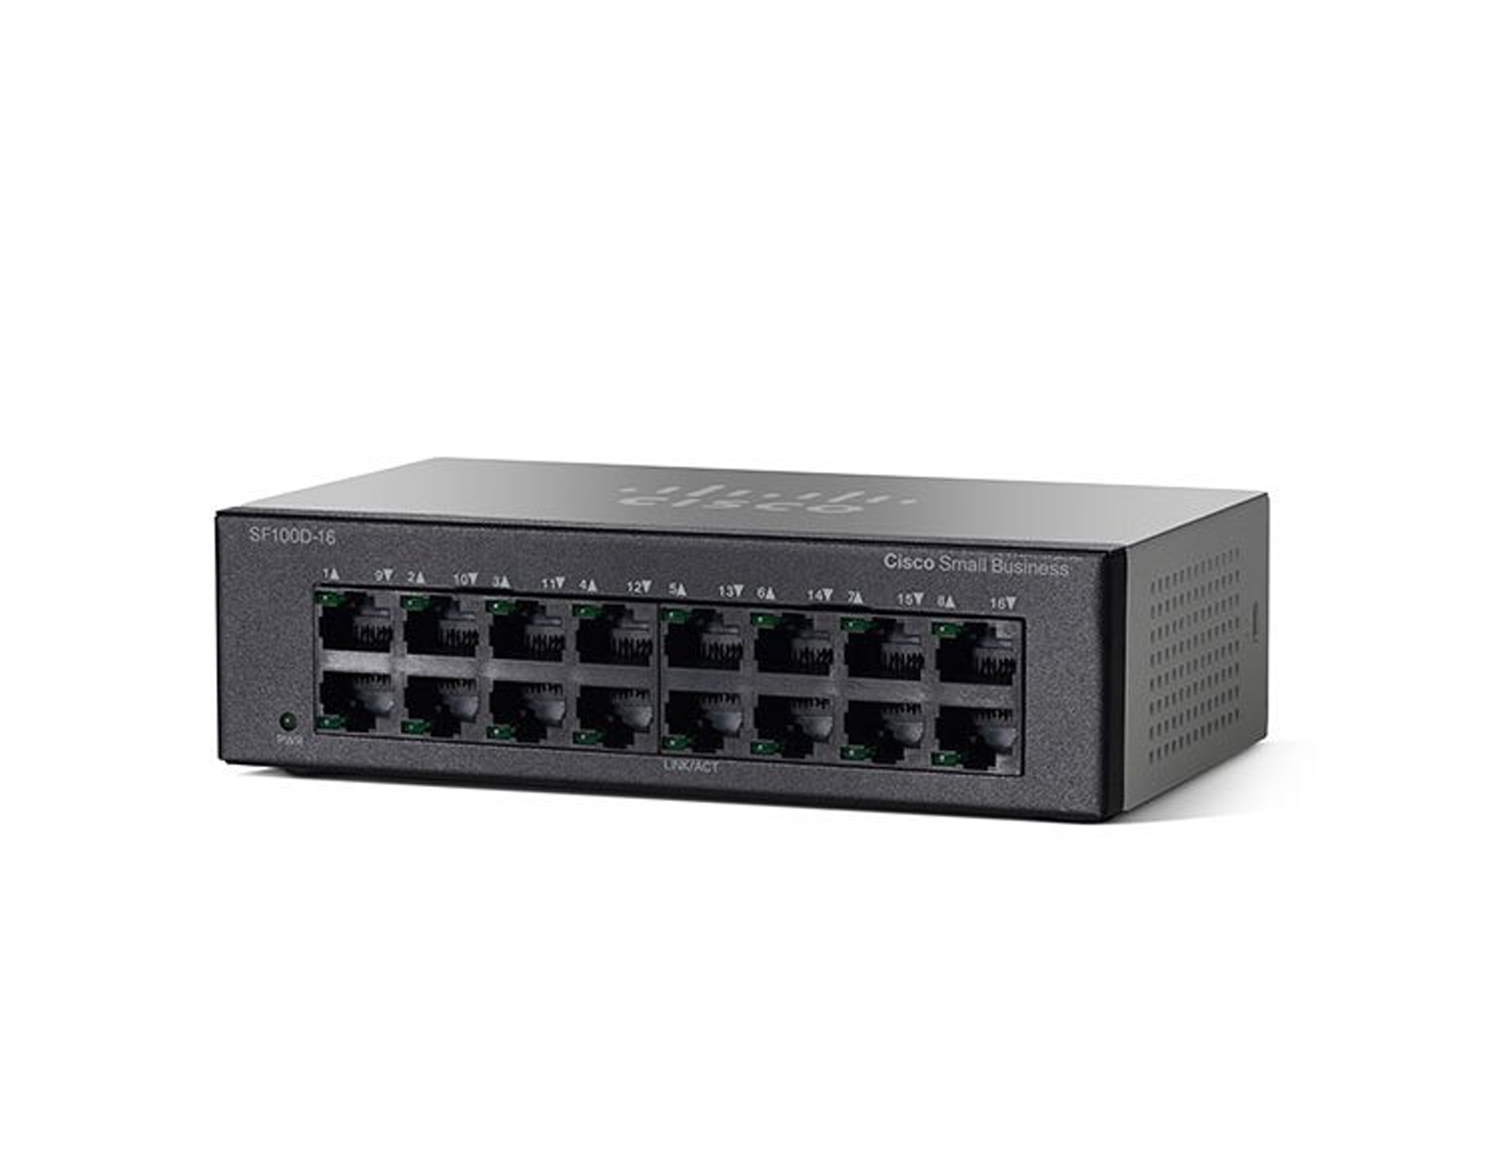 Cisco Small Business 100 Series Sf100d-16-Na Unmanaged 16-Port Desktop Switch